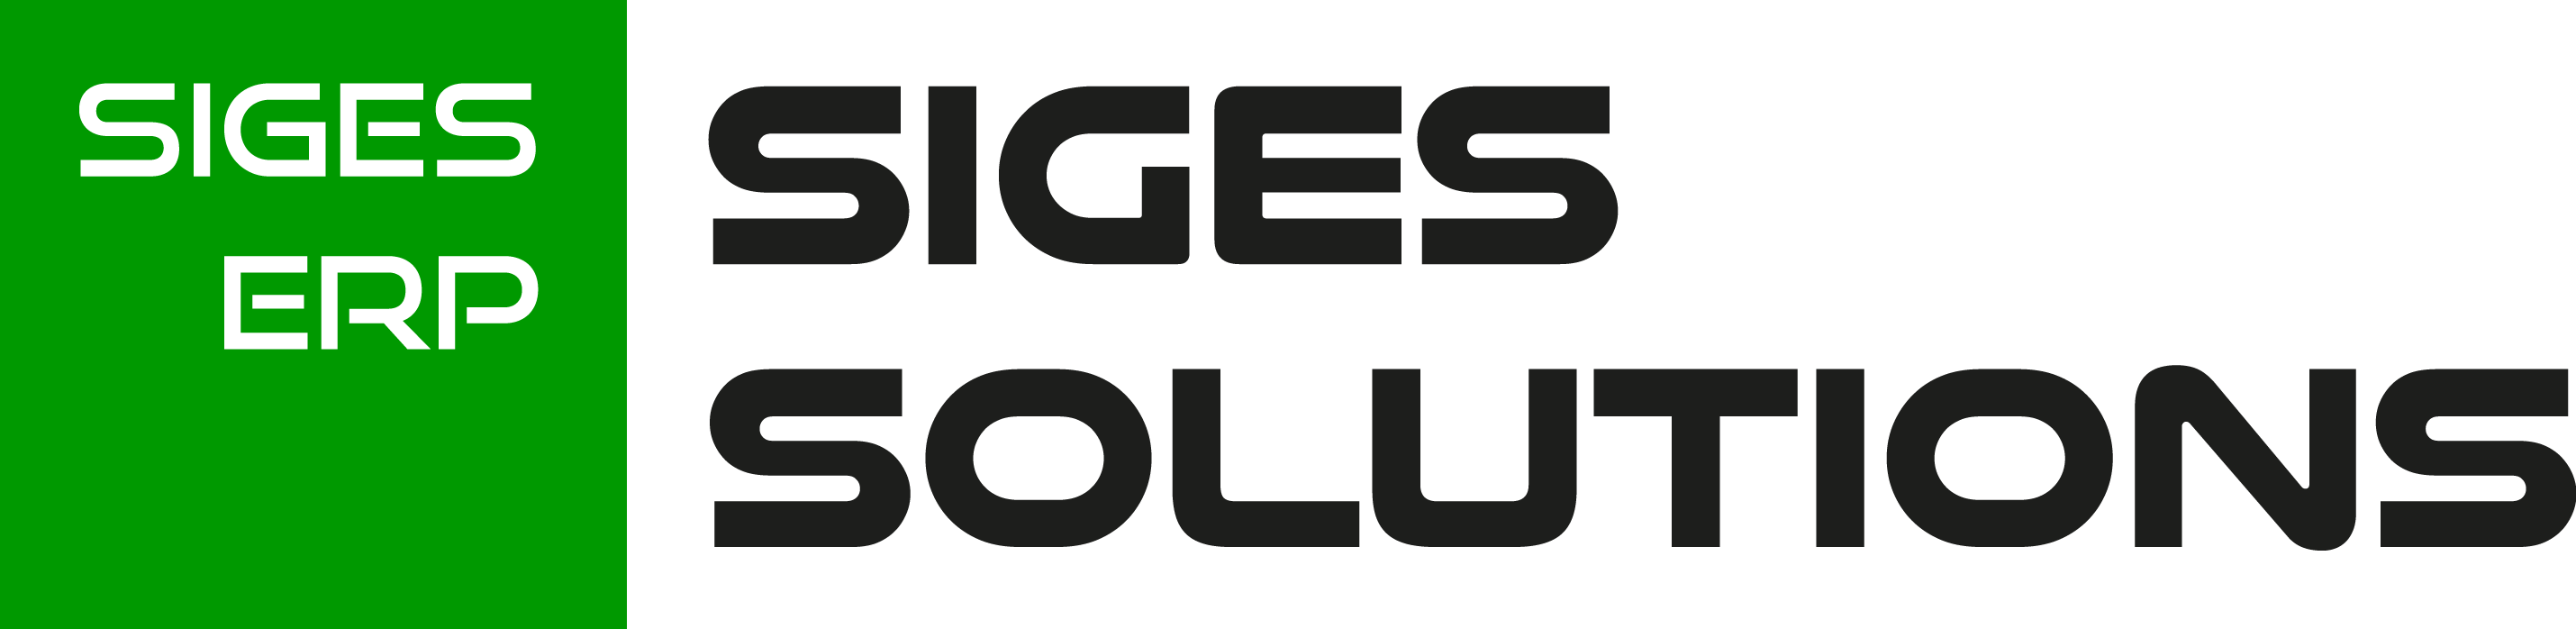 Siges Solutions